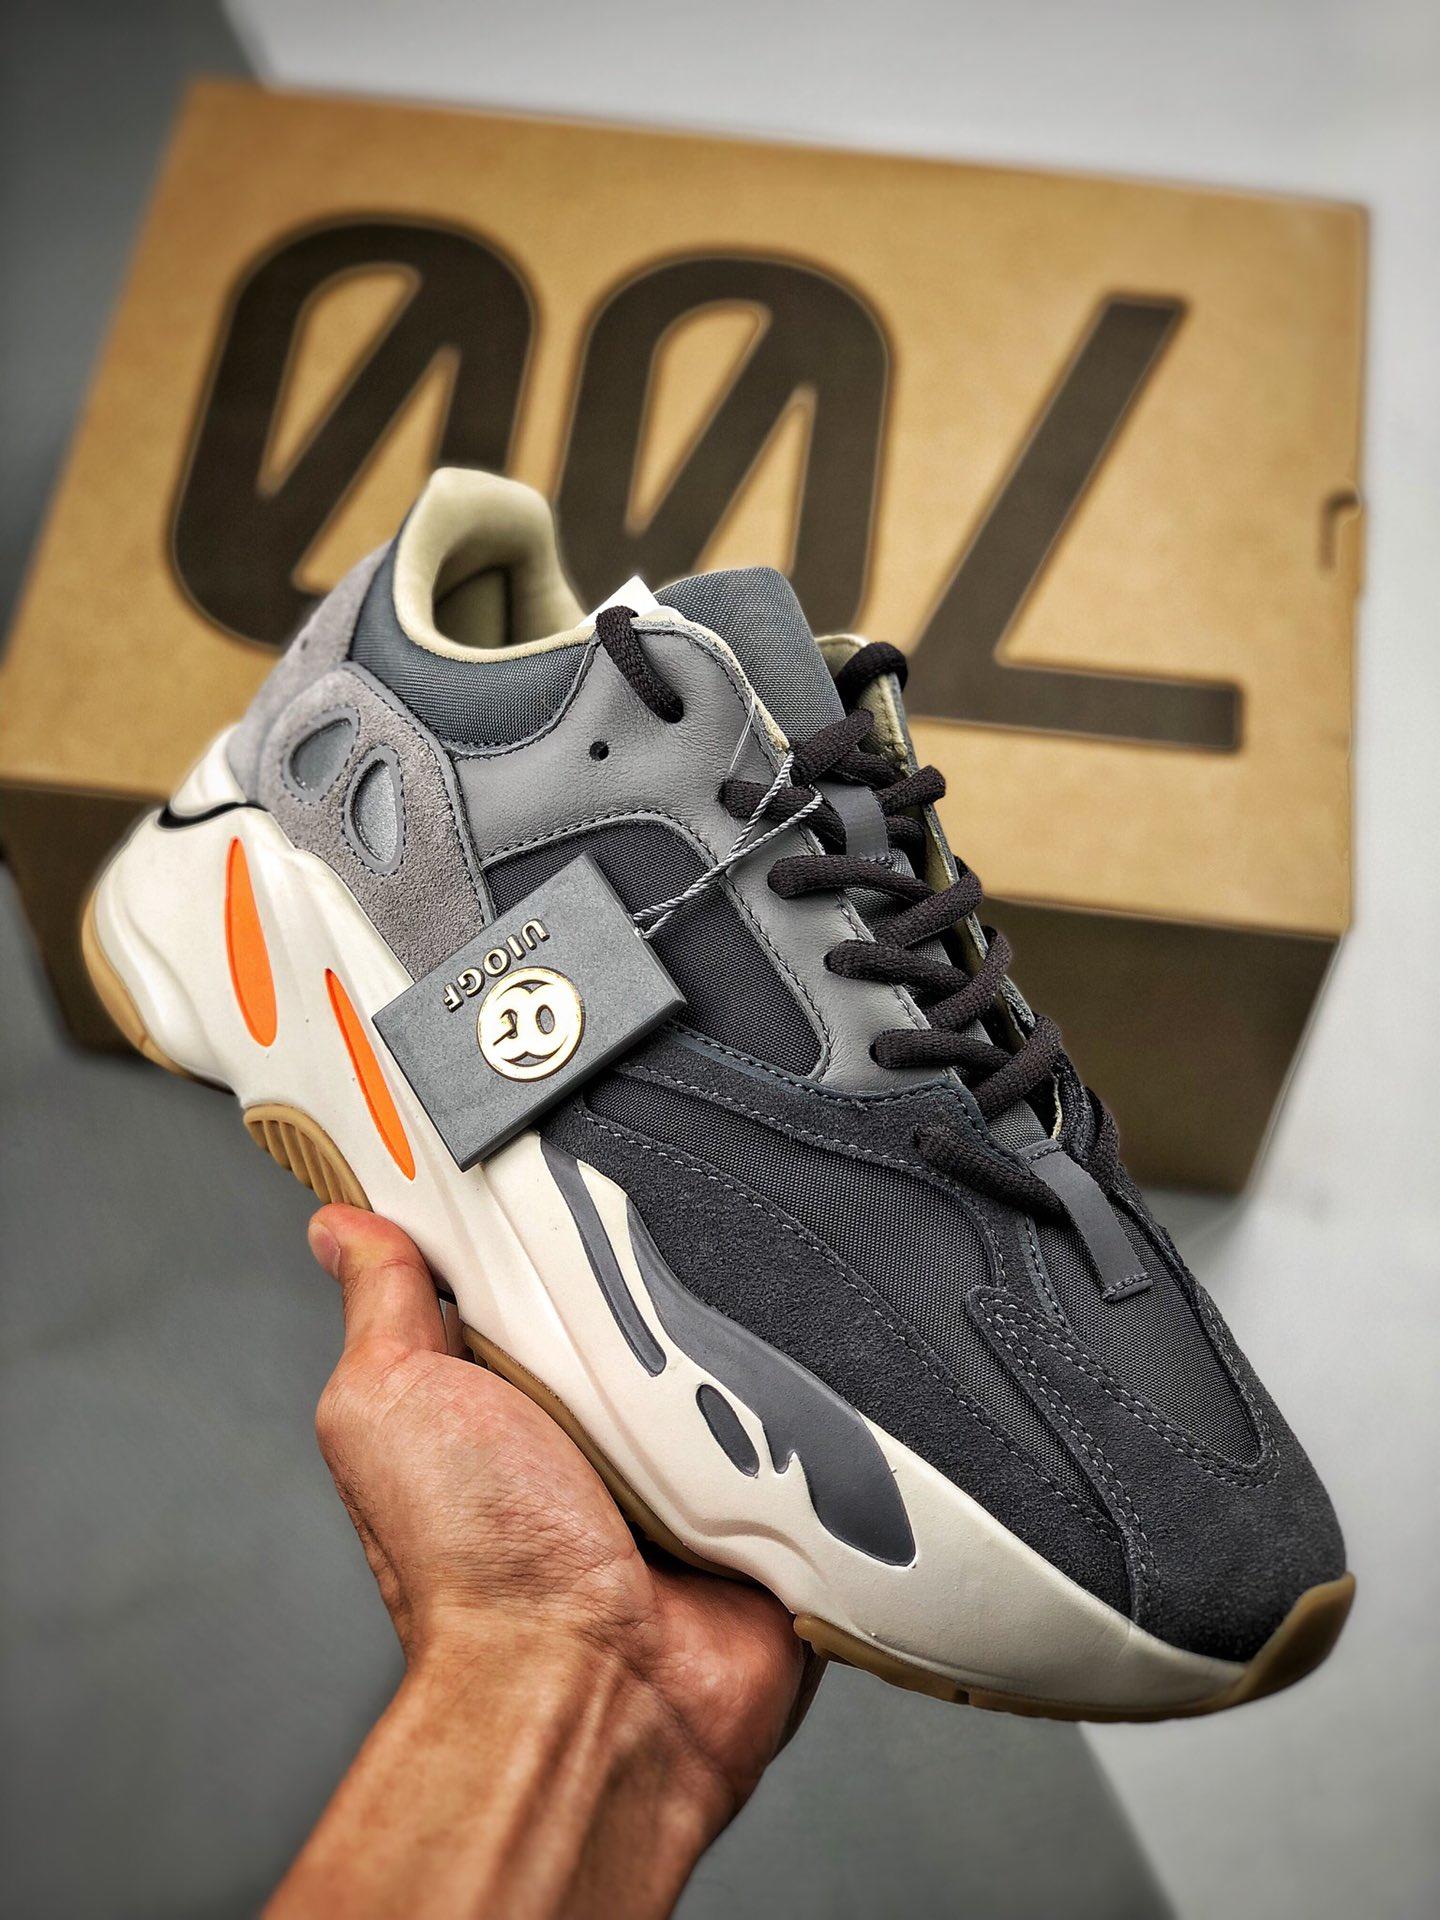 adidas Yeezy Boost 700 ‘Magnet’ FV9922 For Sale – Sneaker Hello